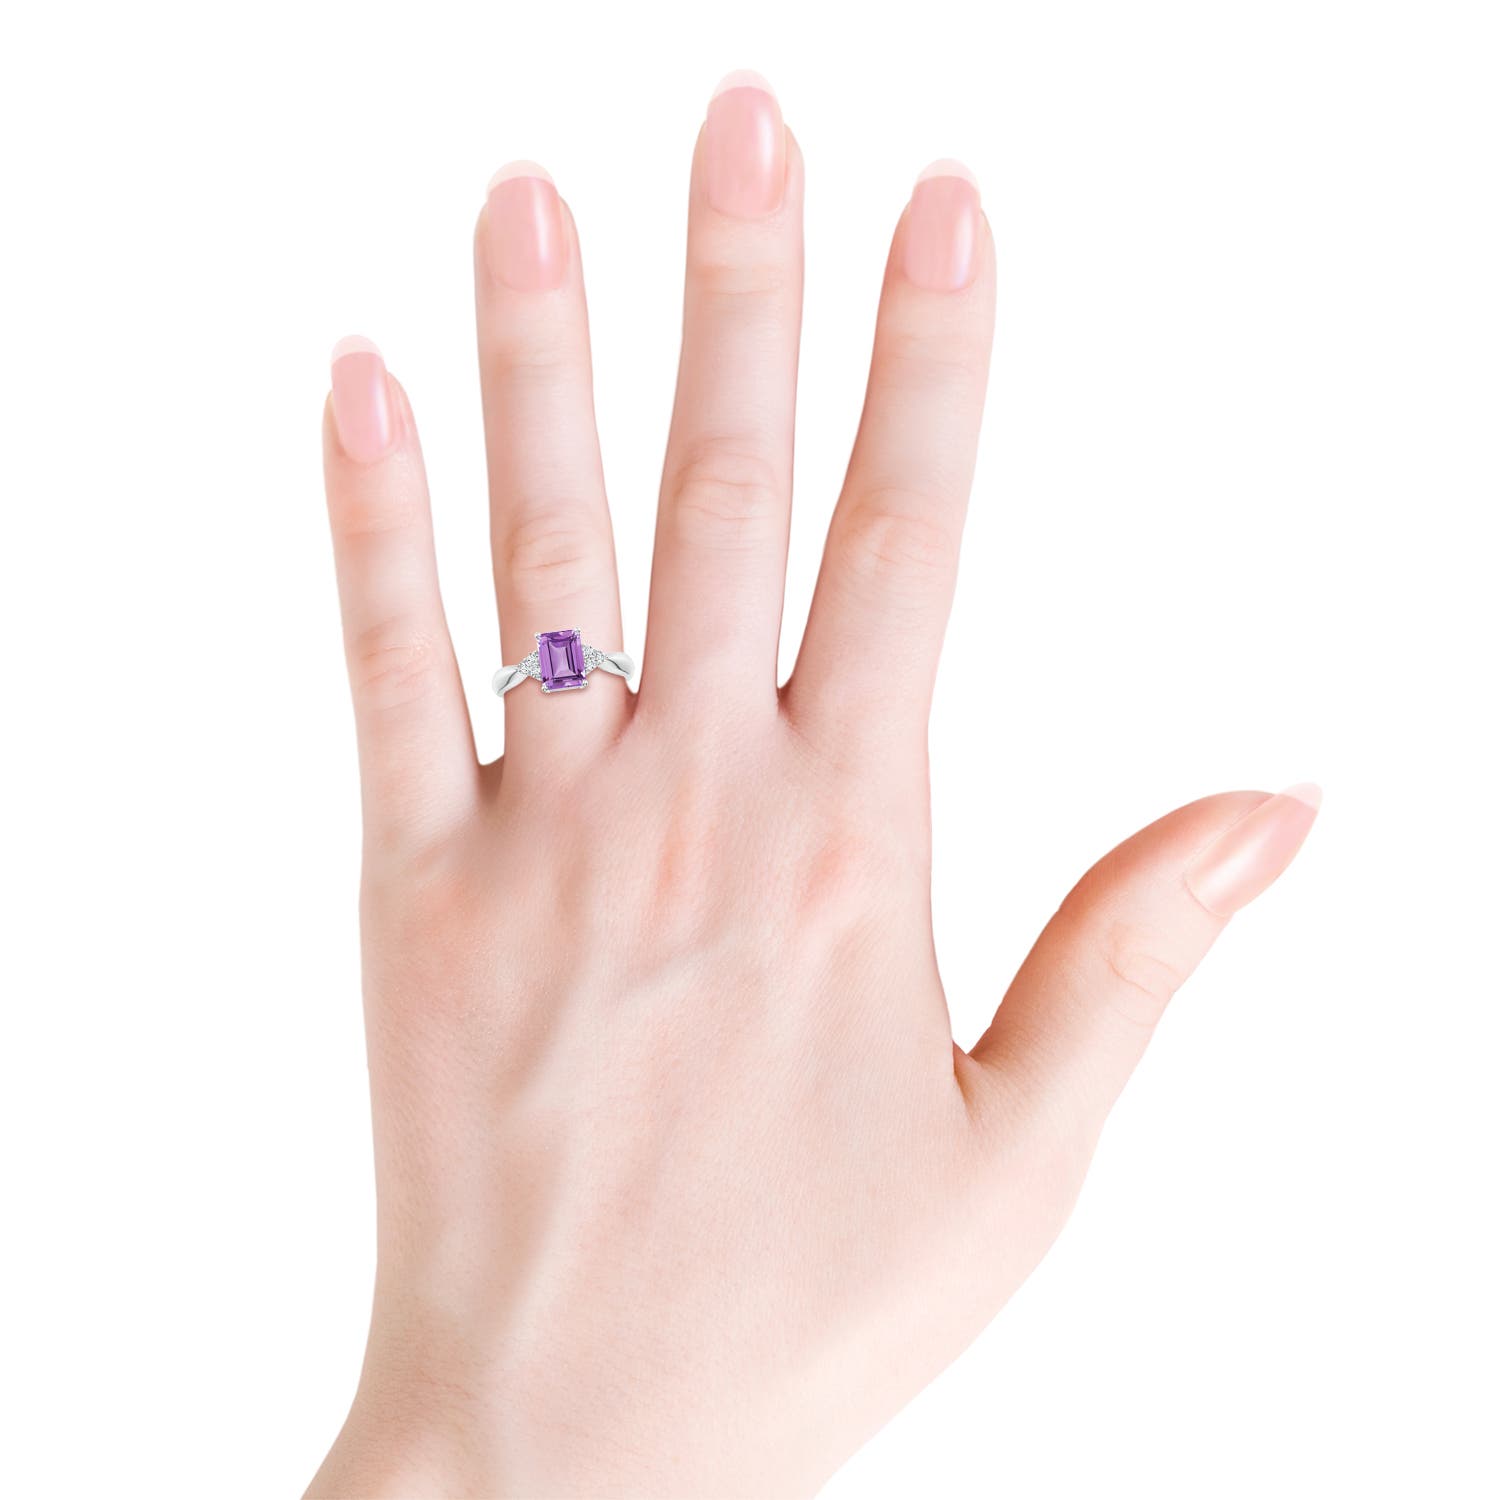 A - Amethyst / 1.67 CT / 14 KT White Gold